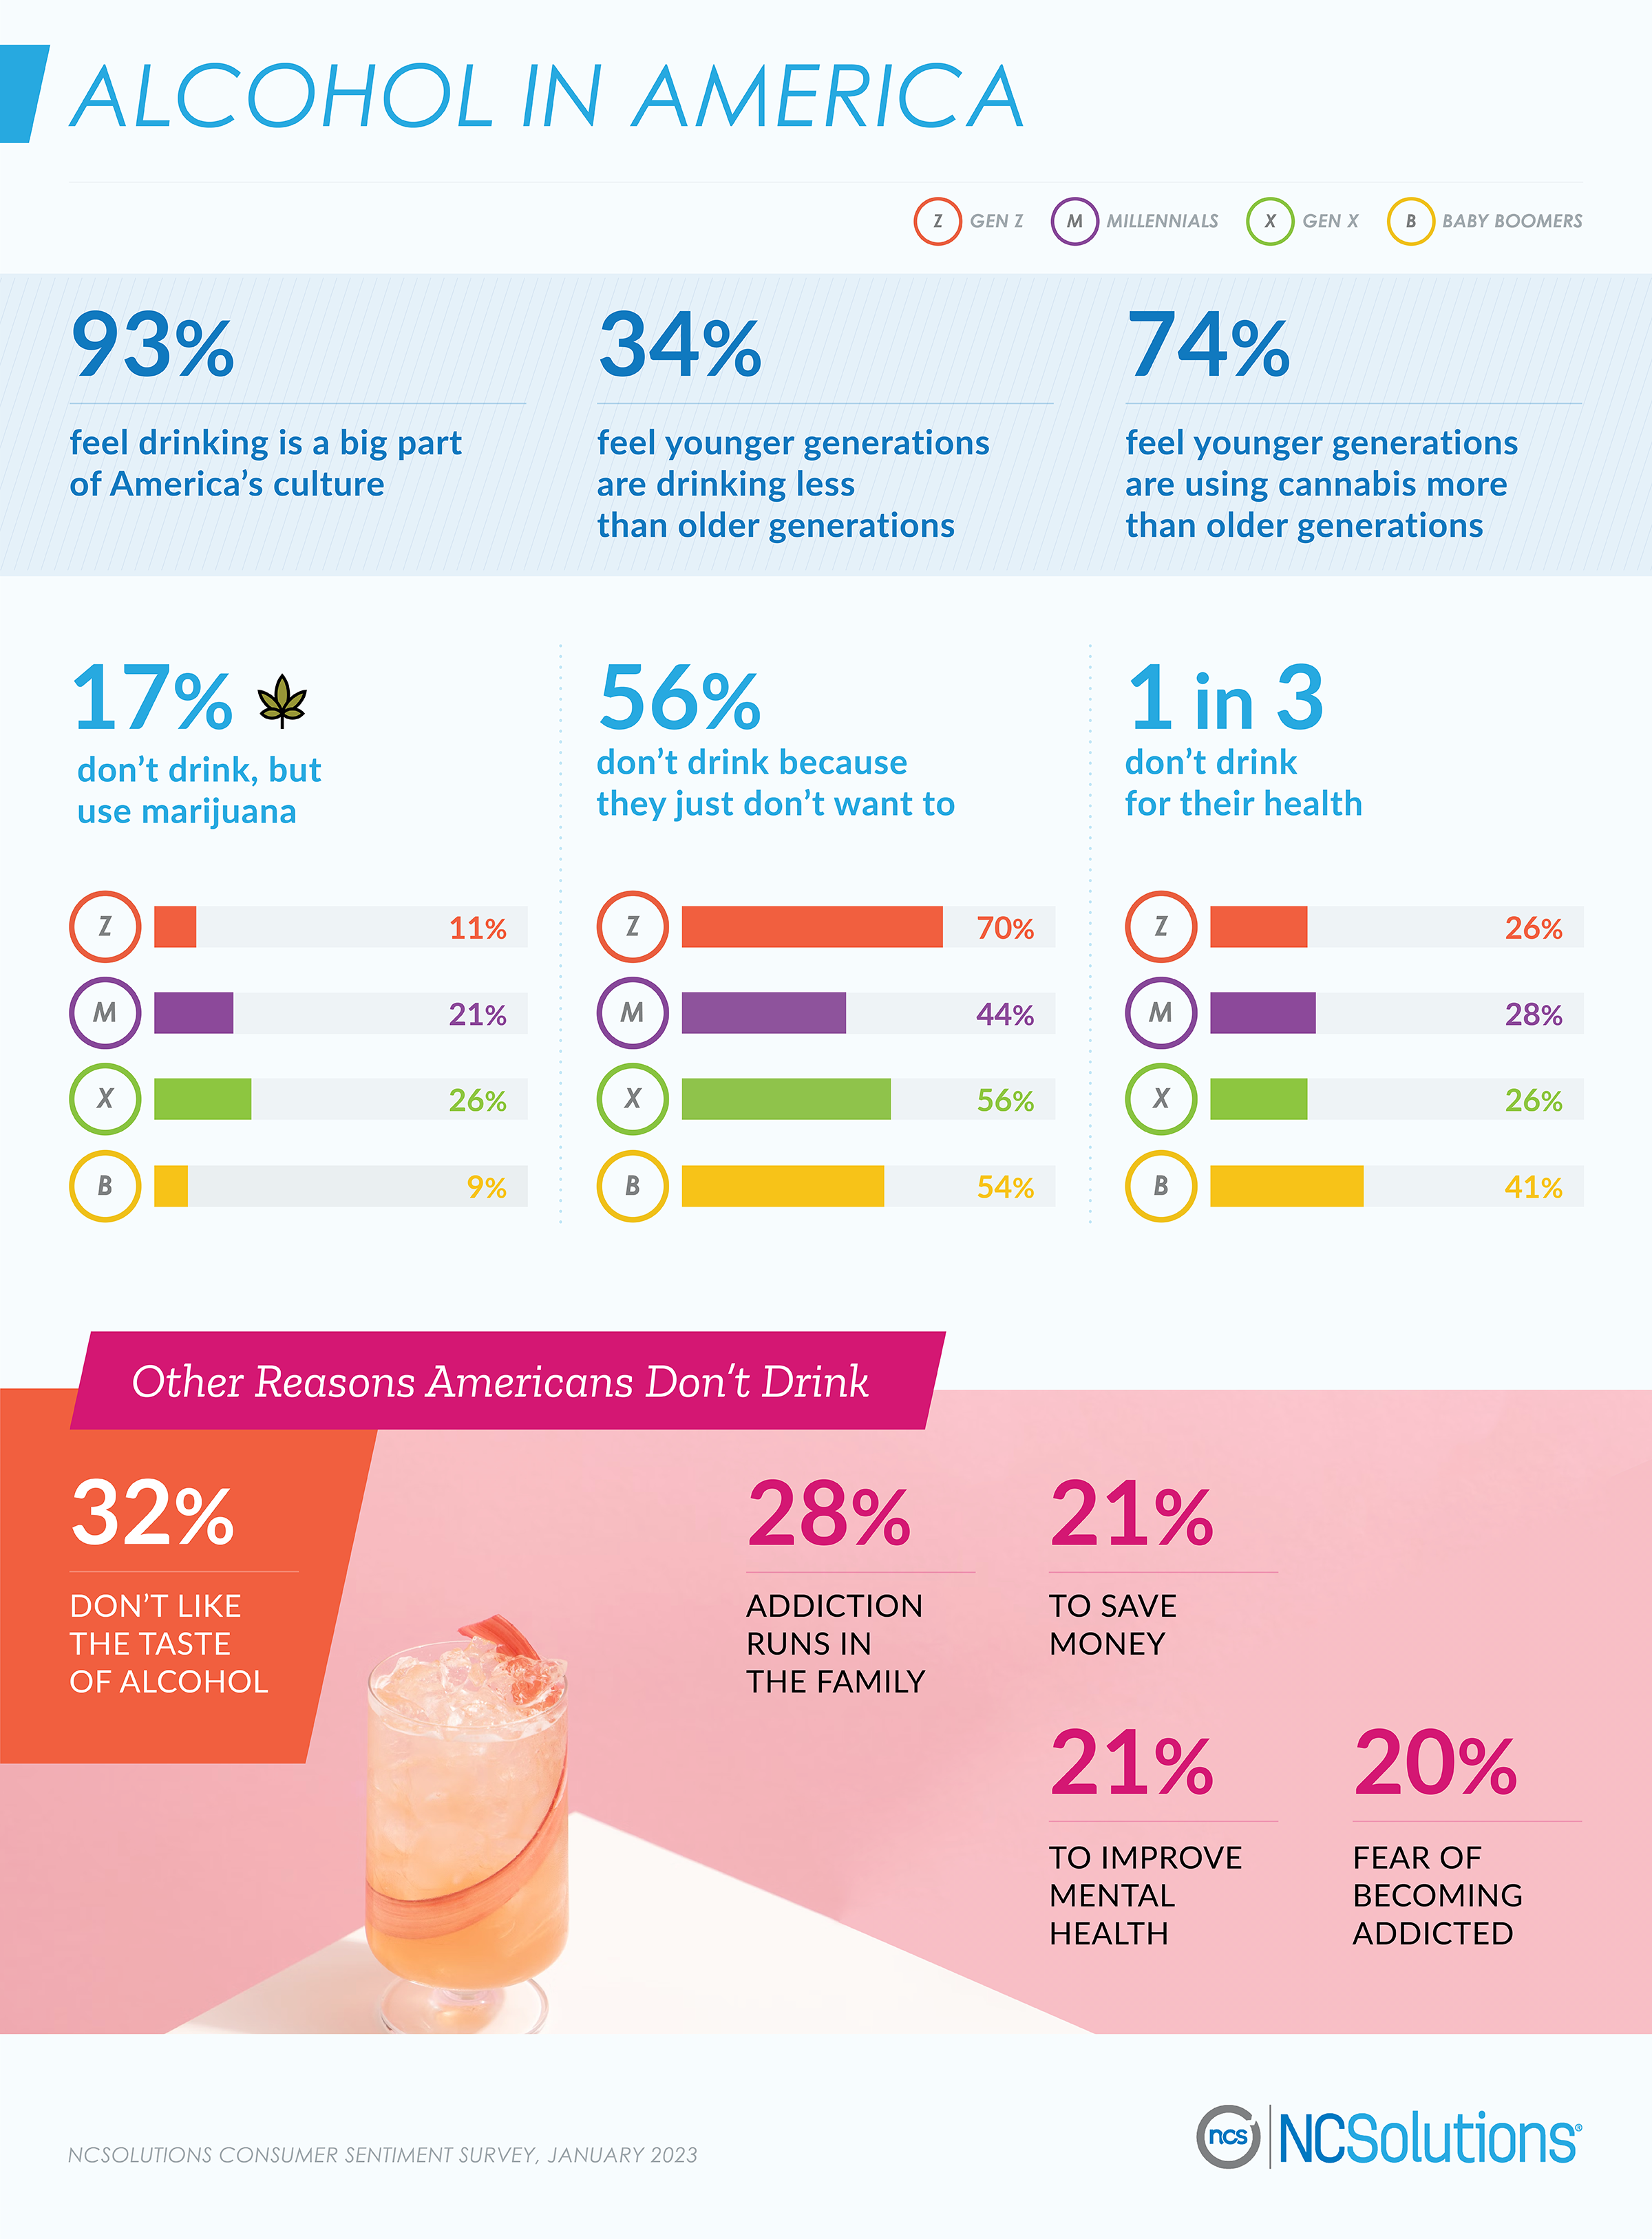  Top reasons Americans don’t drink and cannabis habits by generation - survey from ncsolutions.com